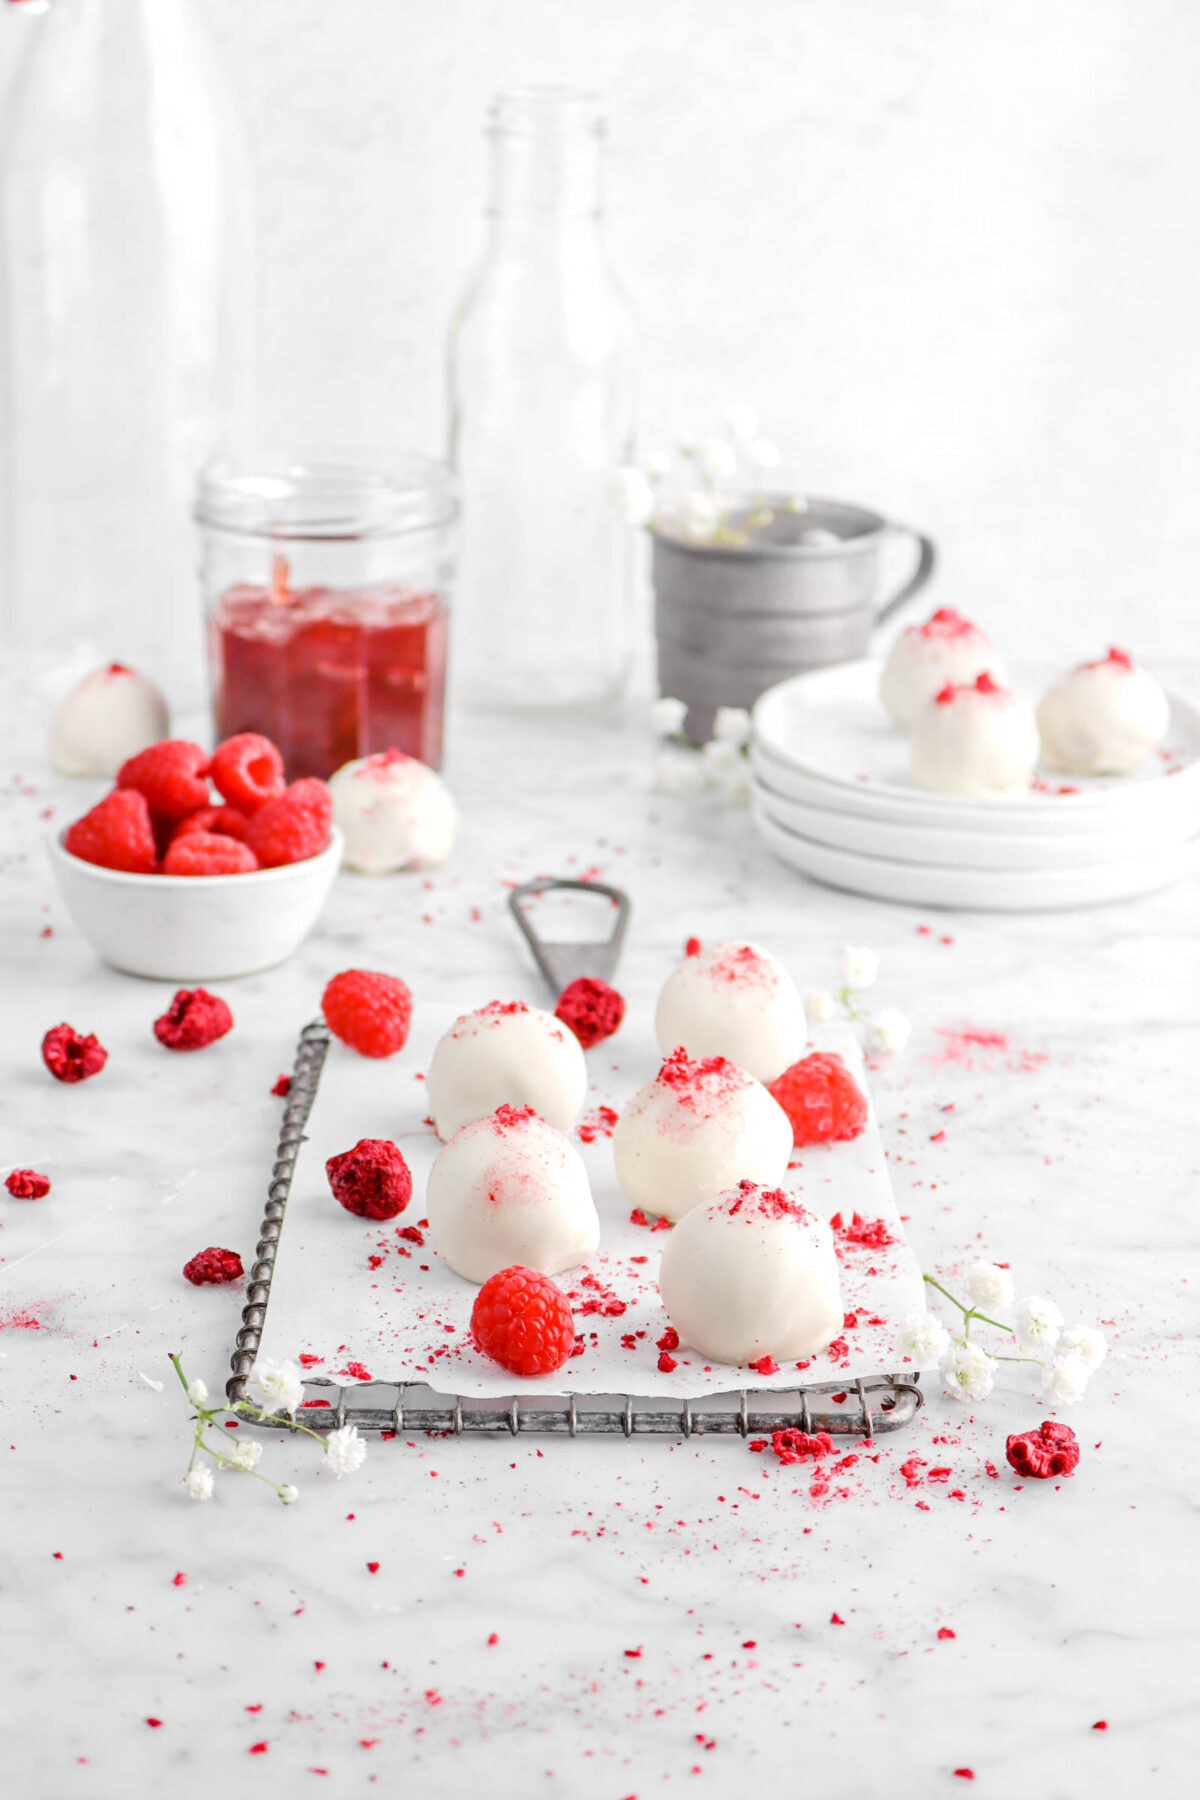 five white chocolate raspberry truffles on parchment paper with jar of jam, bowl of fresh raspberries, stacked plates, and empty glasses behind